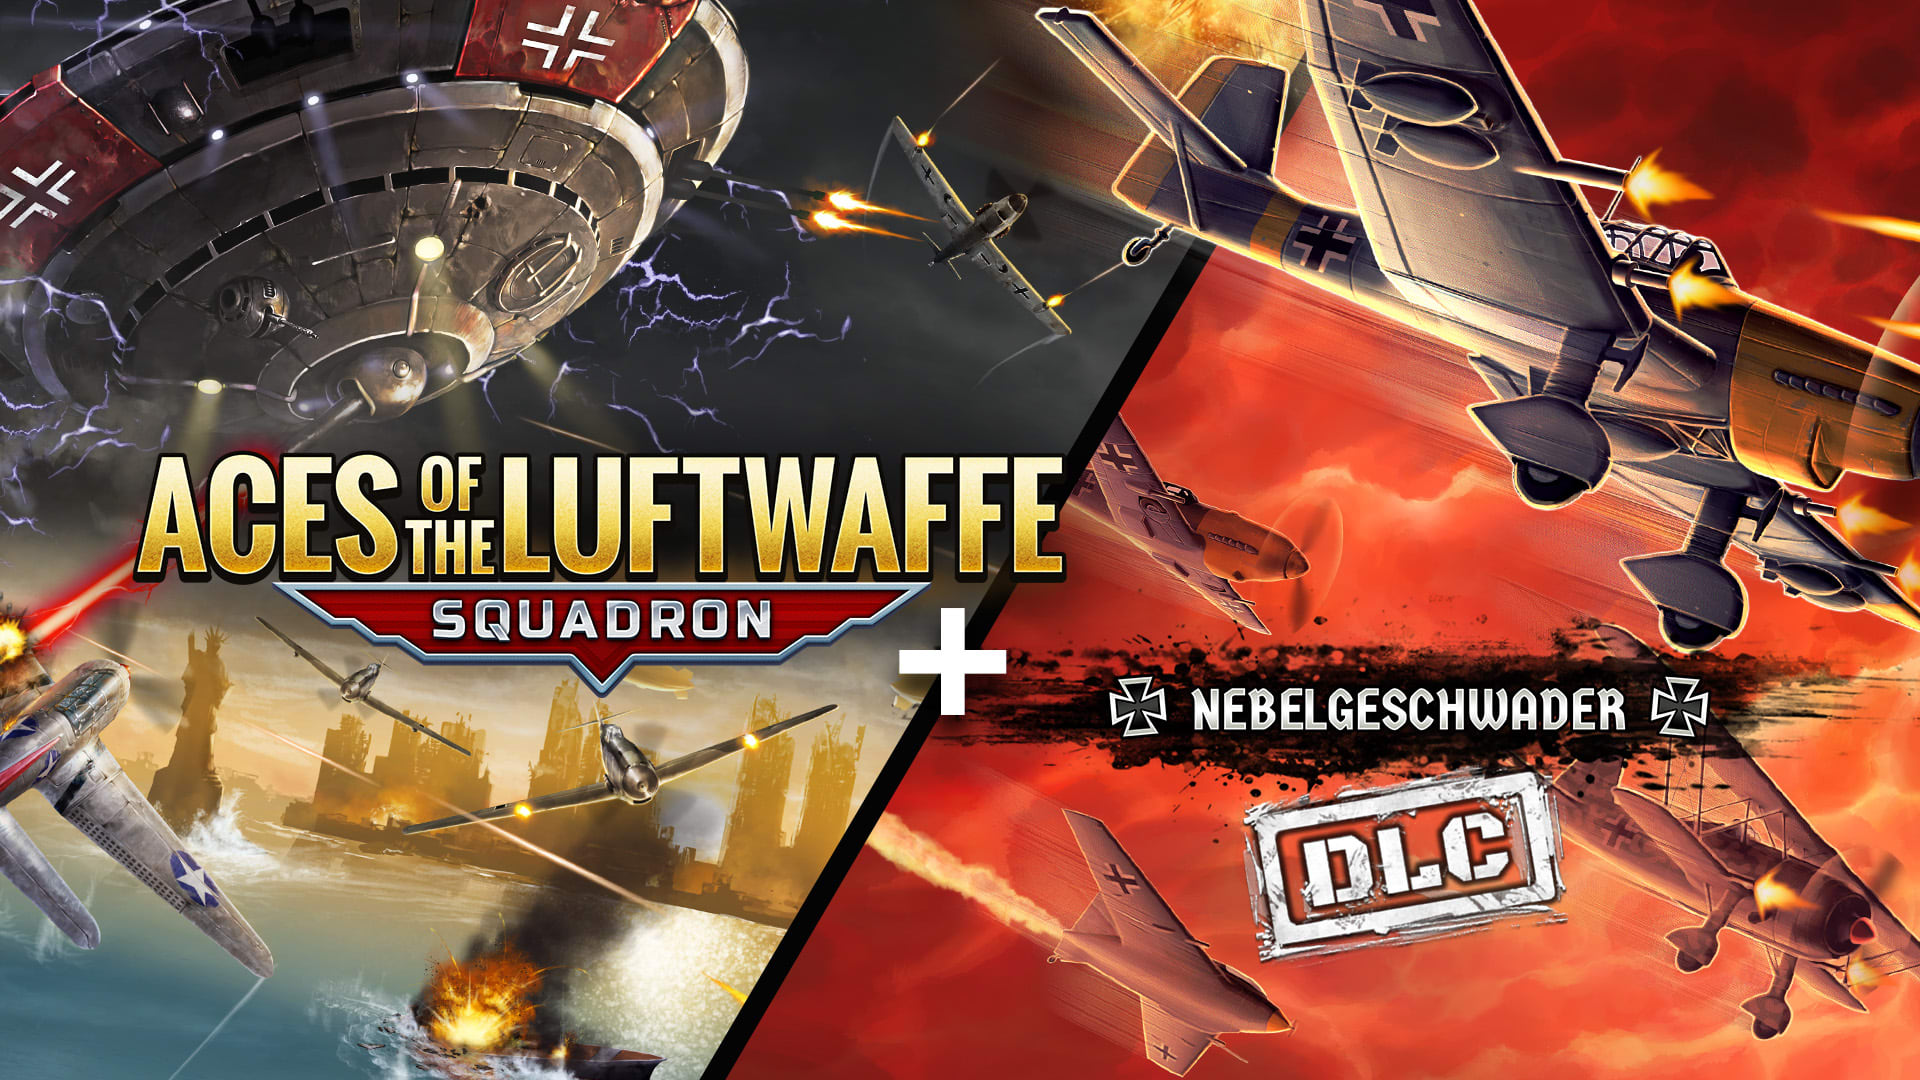 Aces of the Luftwaffe - Squadron Extended Edition 1